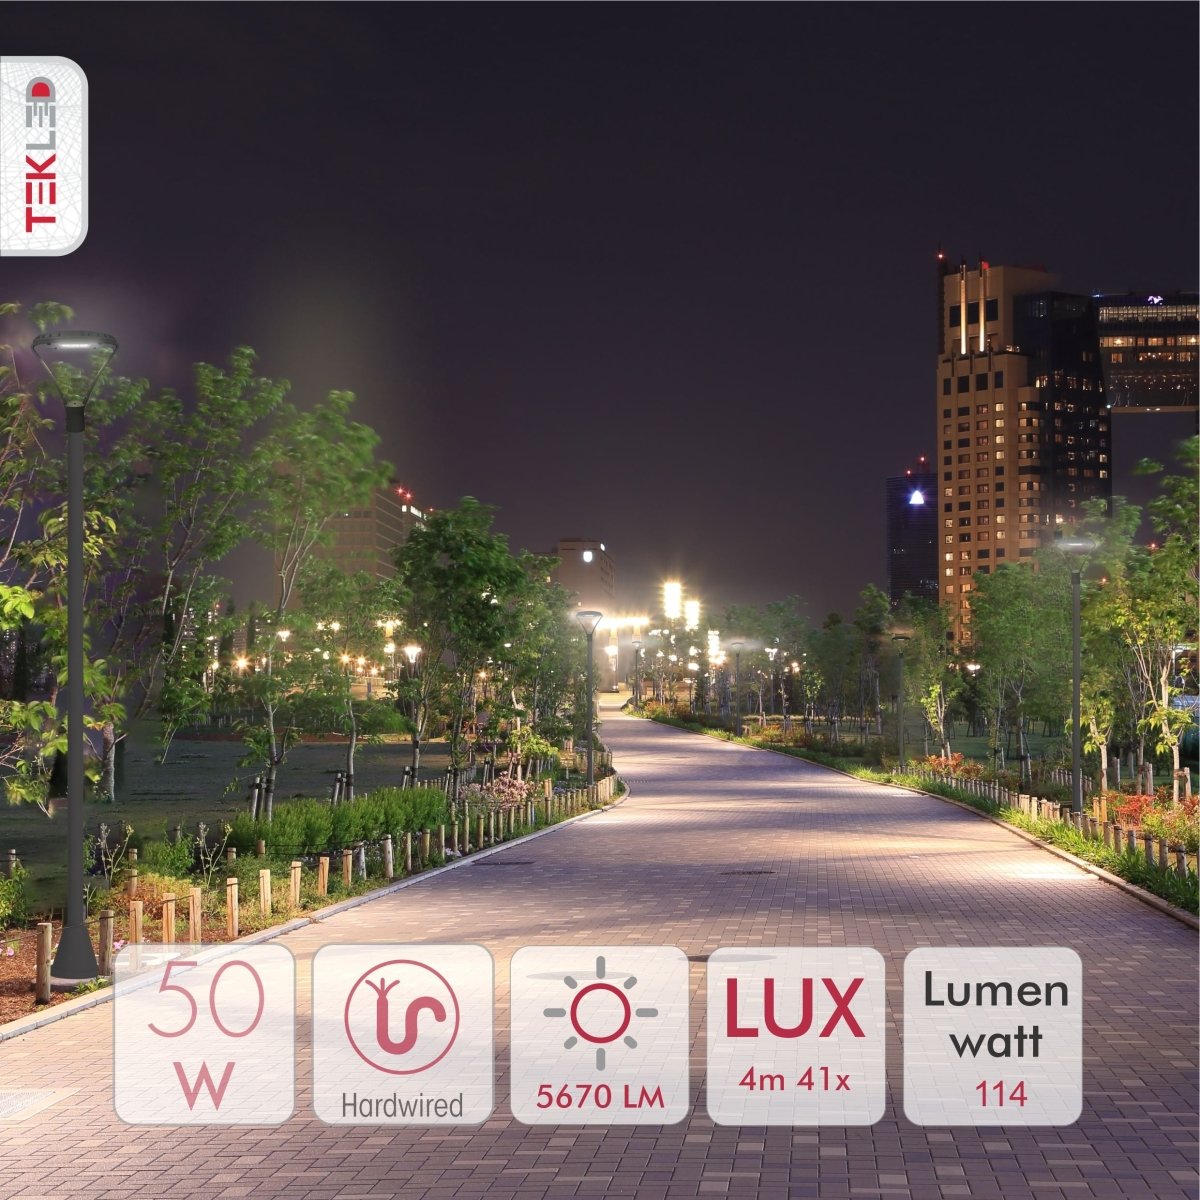 Led Ataman Lamp Post Top Light 50W 4000K Cool White Ip65 Grey in outdoor setting with tech specs